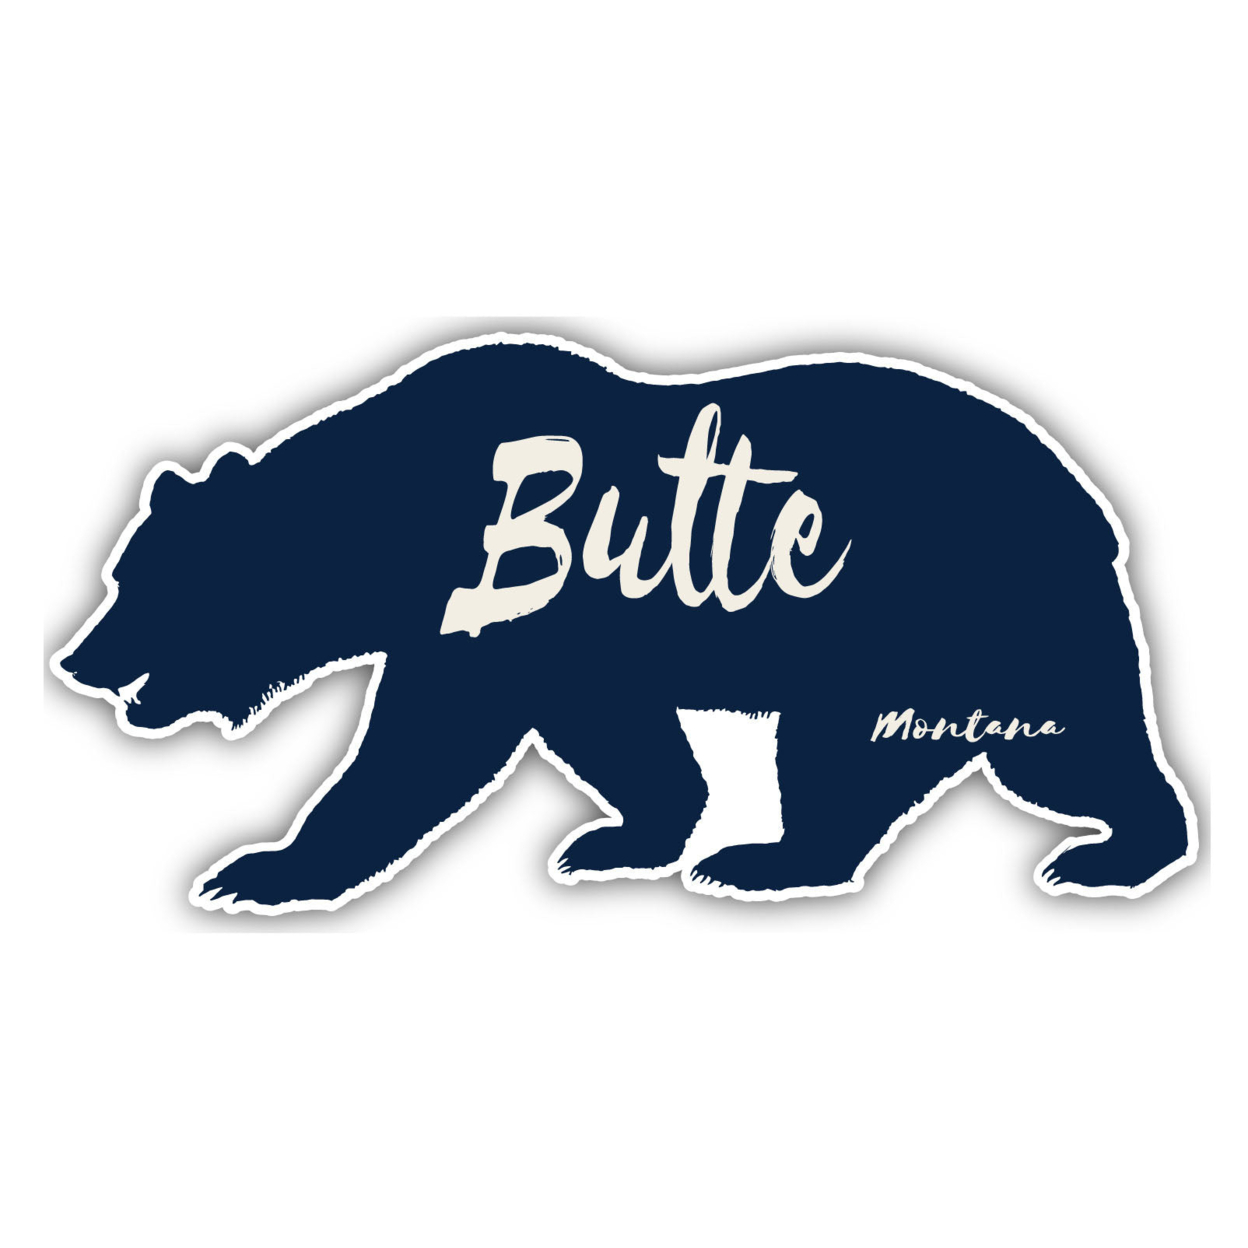 Butte Montana Souvenir Decorative Stickers (Choose Theme And Size) - 4-Pack, 2-Inch, Camp Life